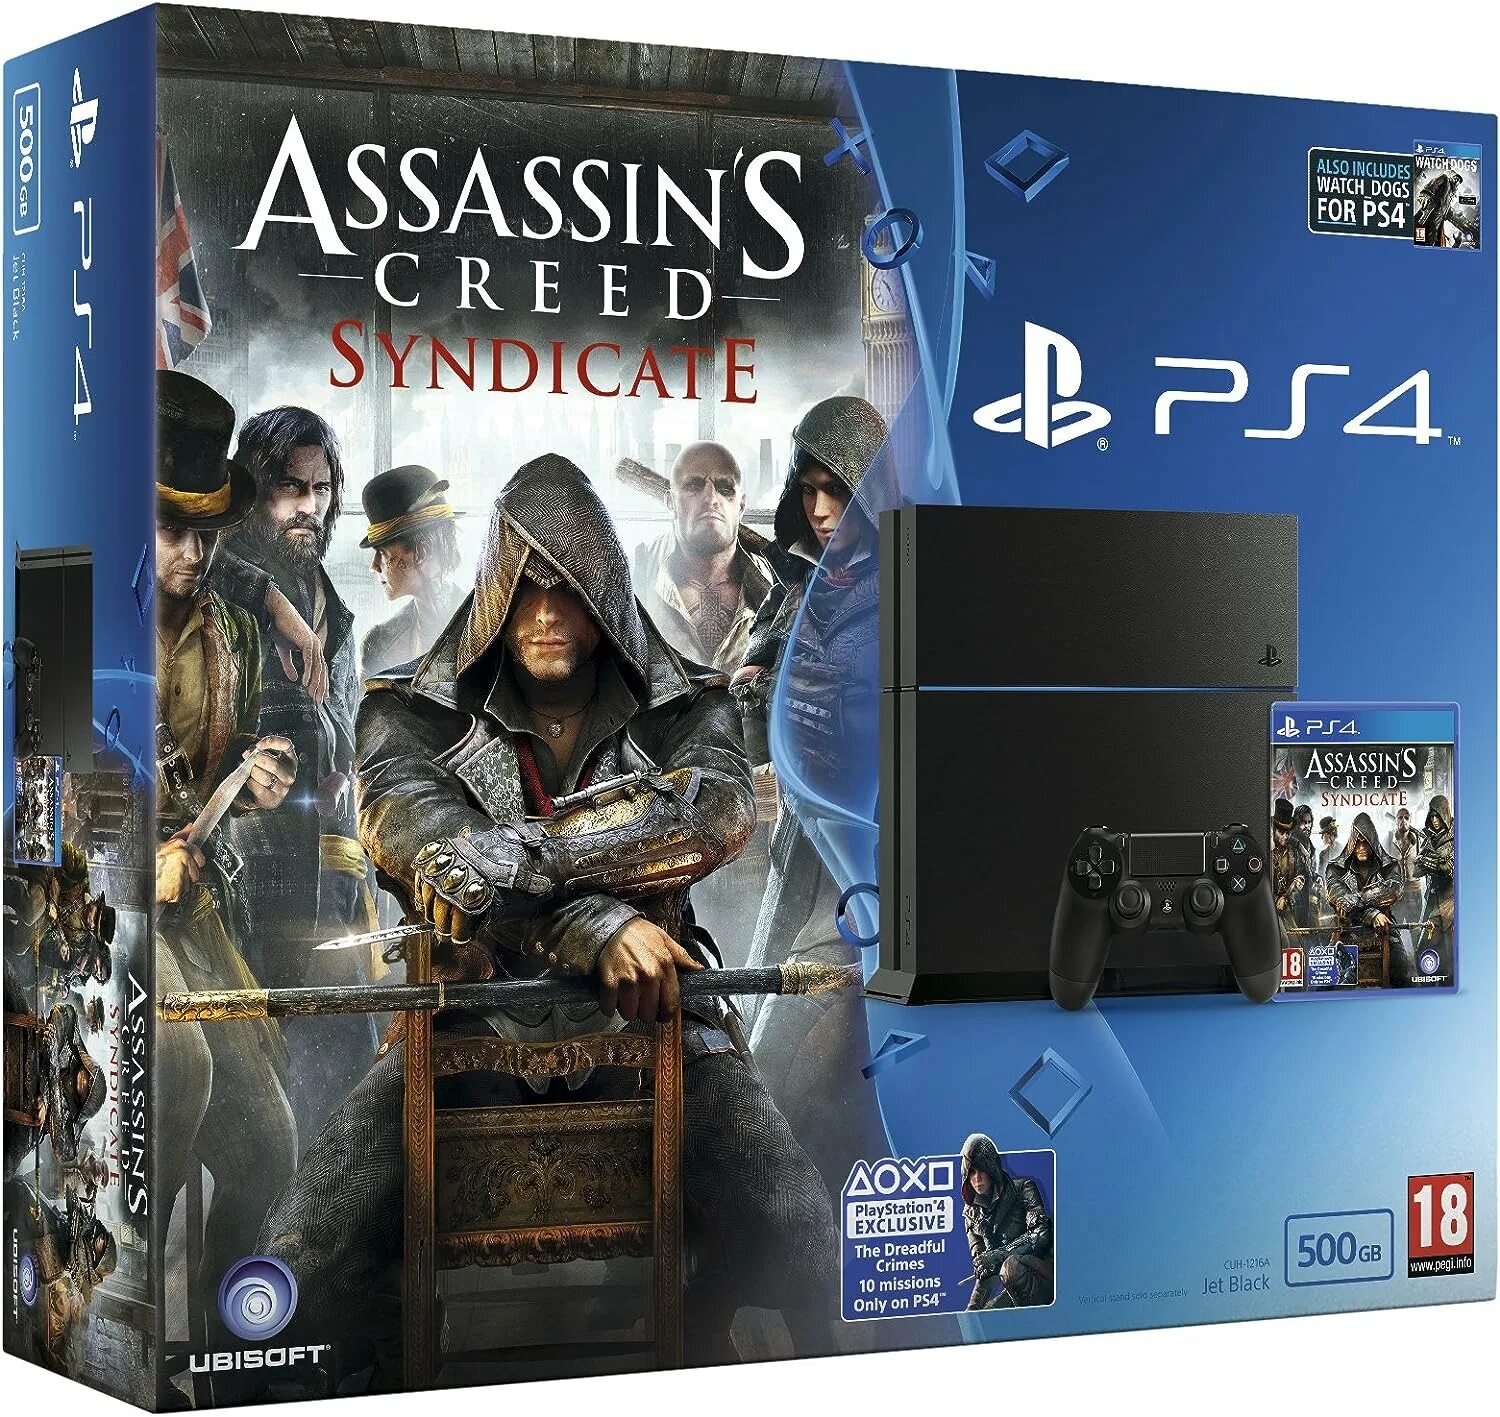 Ps4 диск Assassins Creed 1. PLAYSTATION 4 диски ассасин 2. Ассасин Крид Синдикат диск ПС 4. Assassin's Creed Синдикат ps4 диск. Все ps4 по порядку